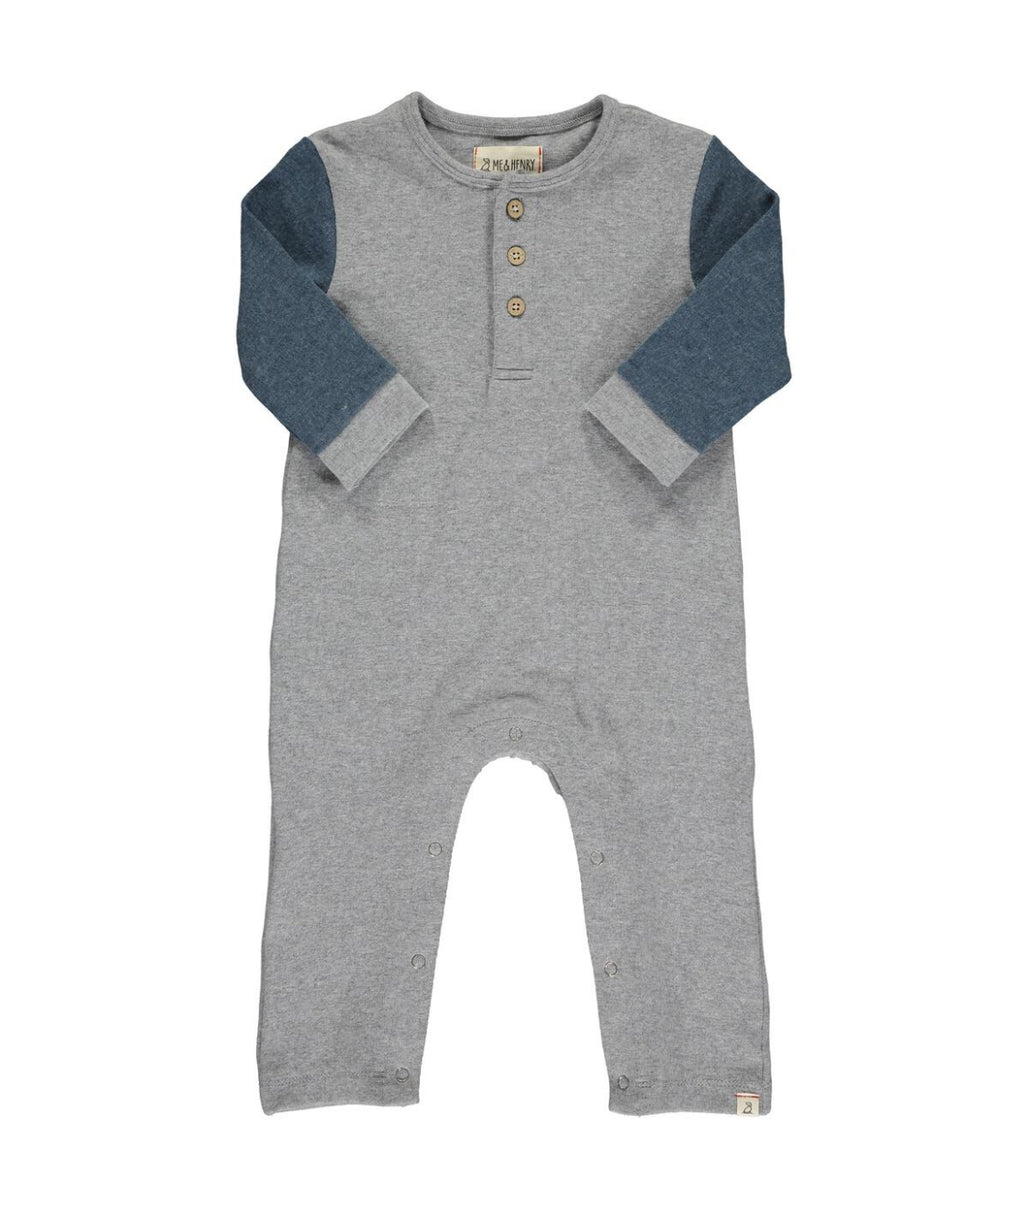 Baby boy Onsie, baby one piece, me and Henry, grey romper